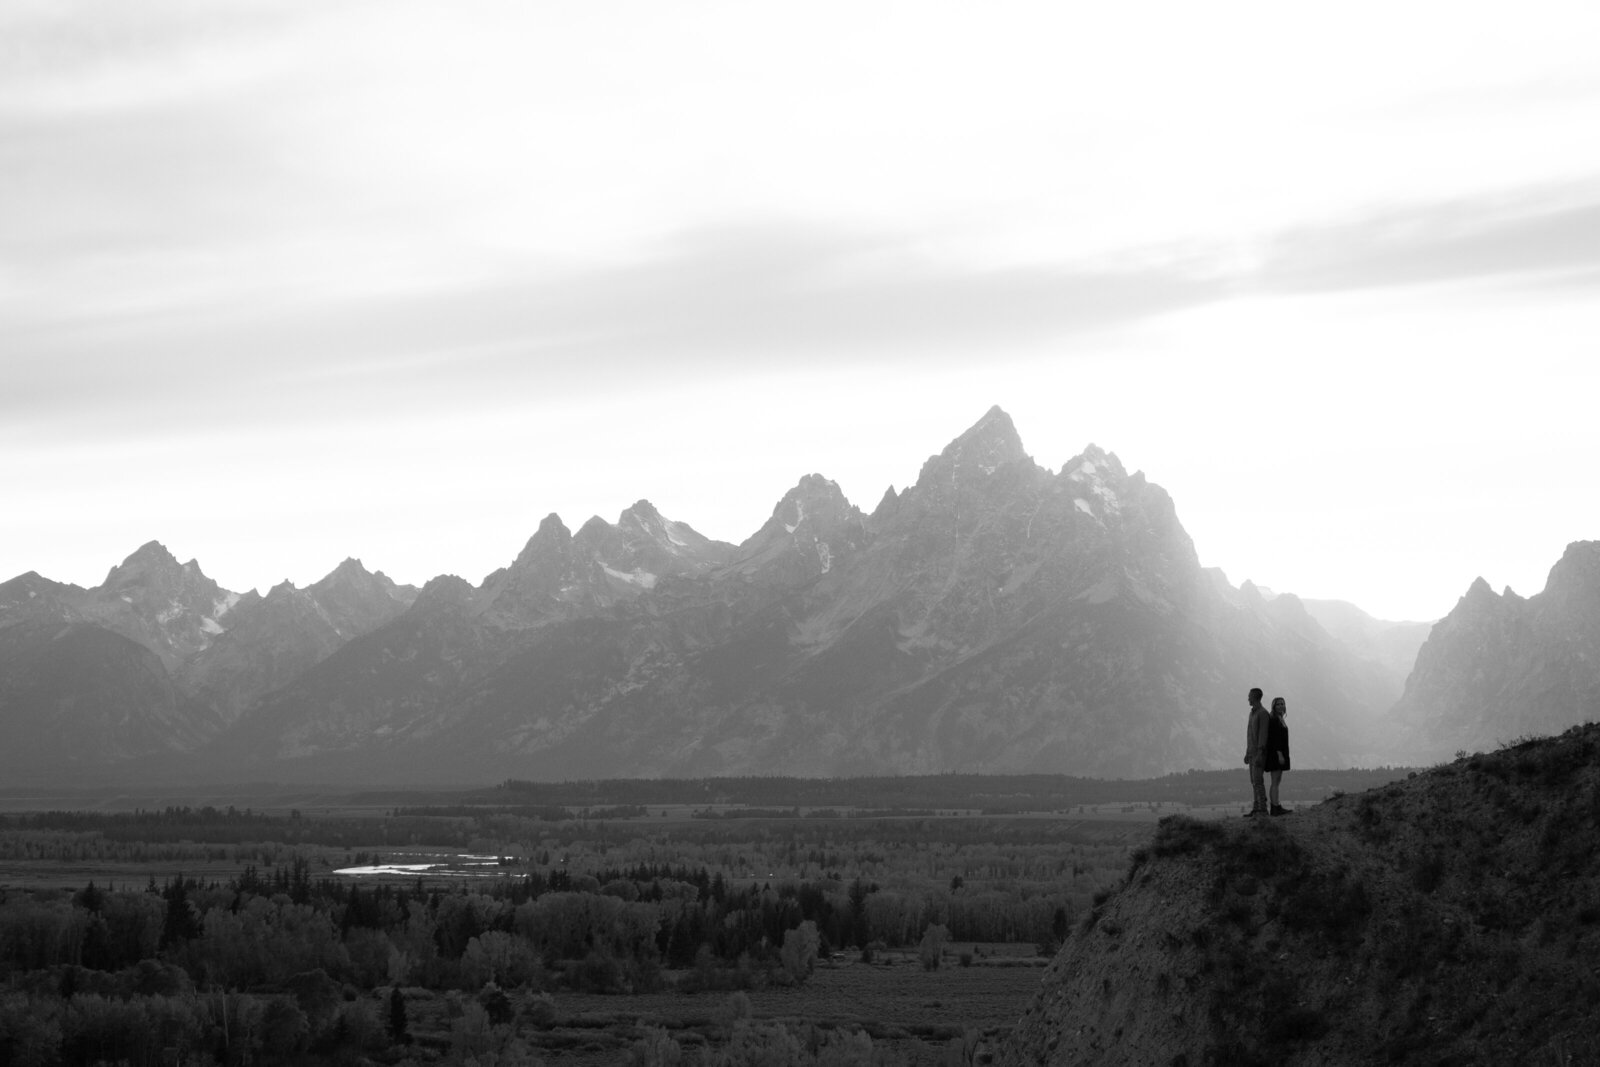 Silhouettes of a couple in front of the Tetons.